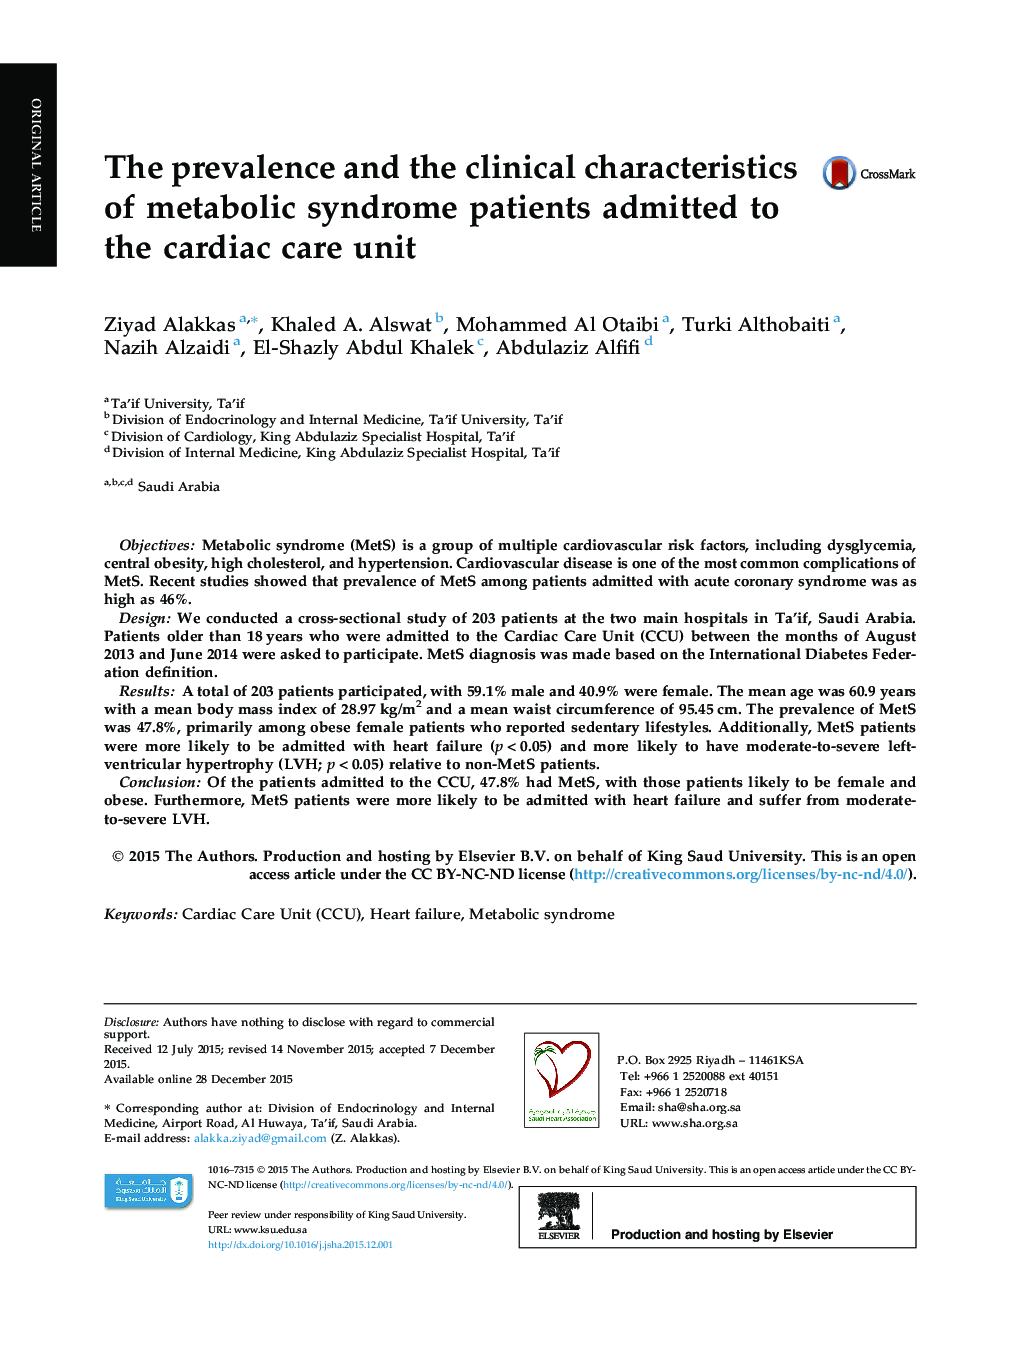 The prevalence and the clinical characteristics of metabolic syndrome patients admitted to the cardiac care unit 